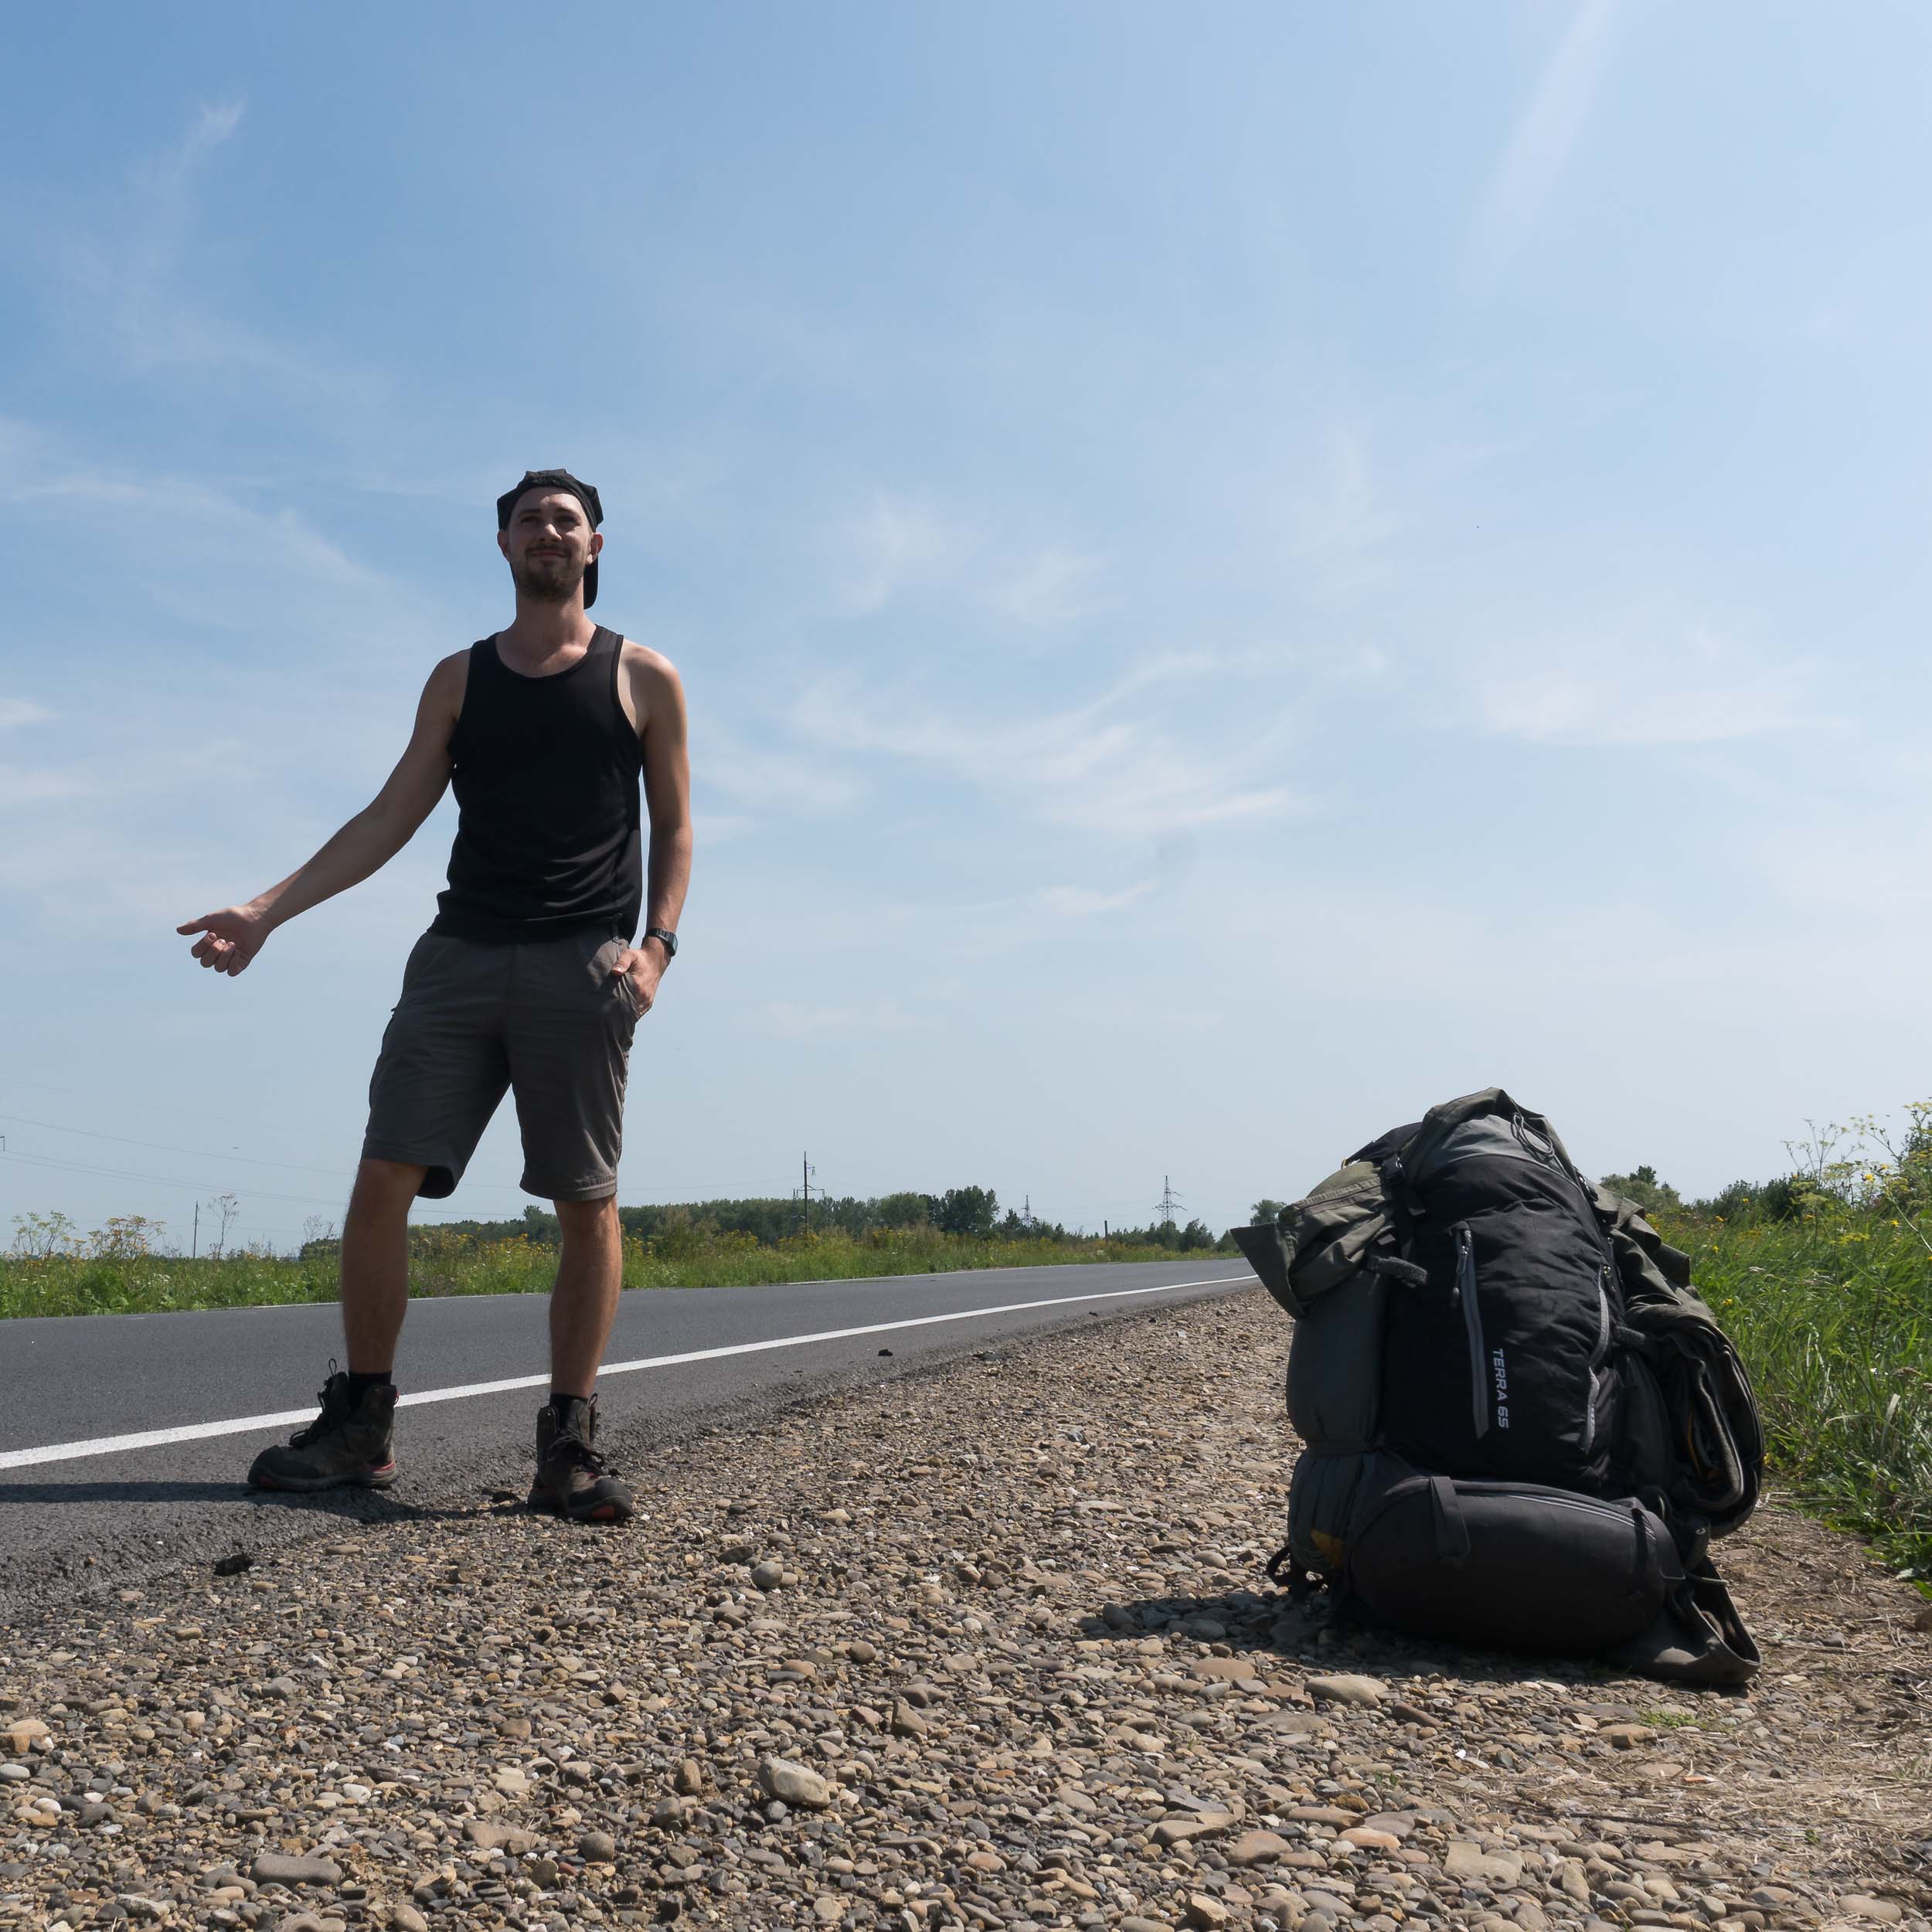 Popping The Hitchhiking Cherry An Honest Retrospective Of My First Hitchhiking Experience The